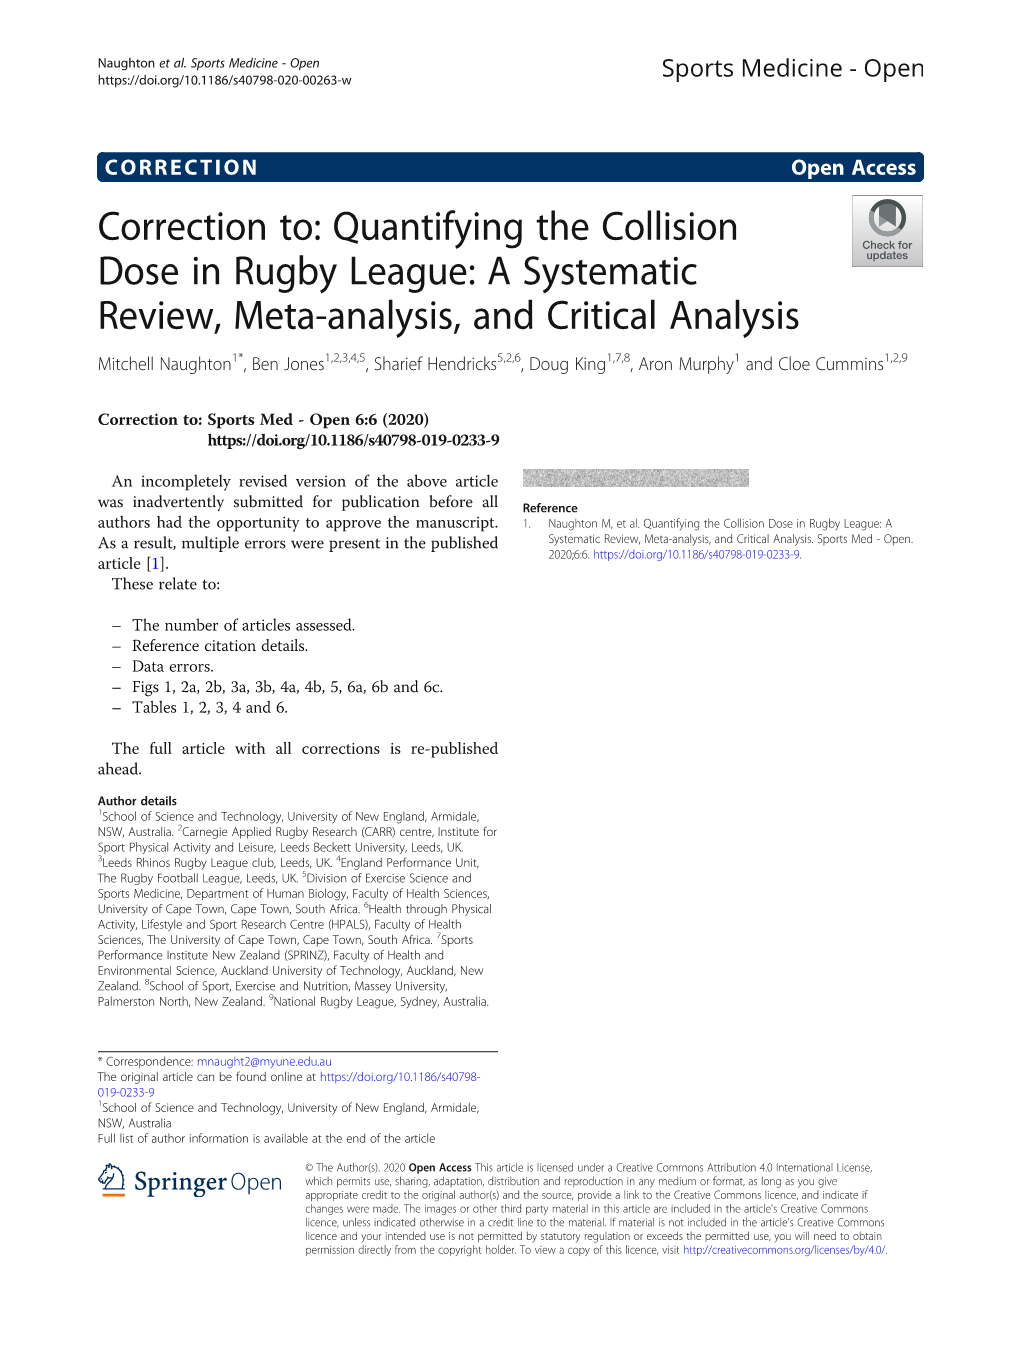 Quantifying the Collision Dose in Rugby League: a Systematic Review, Meta